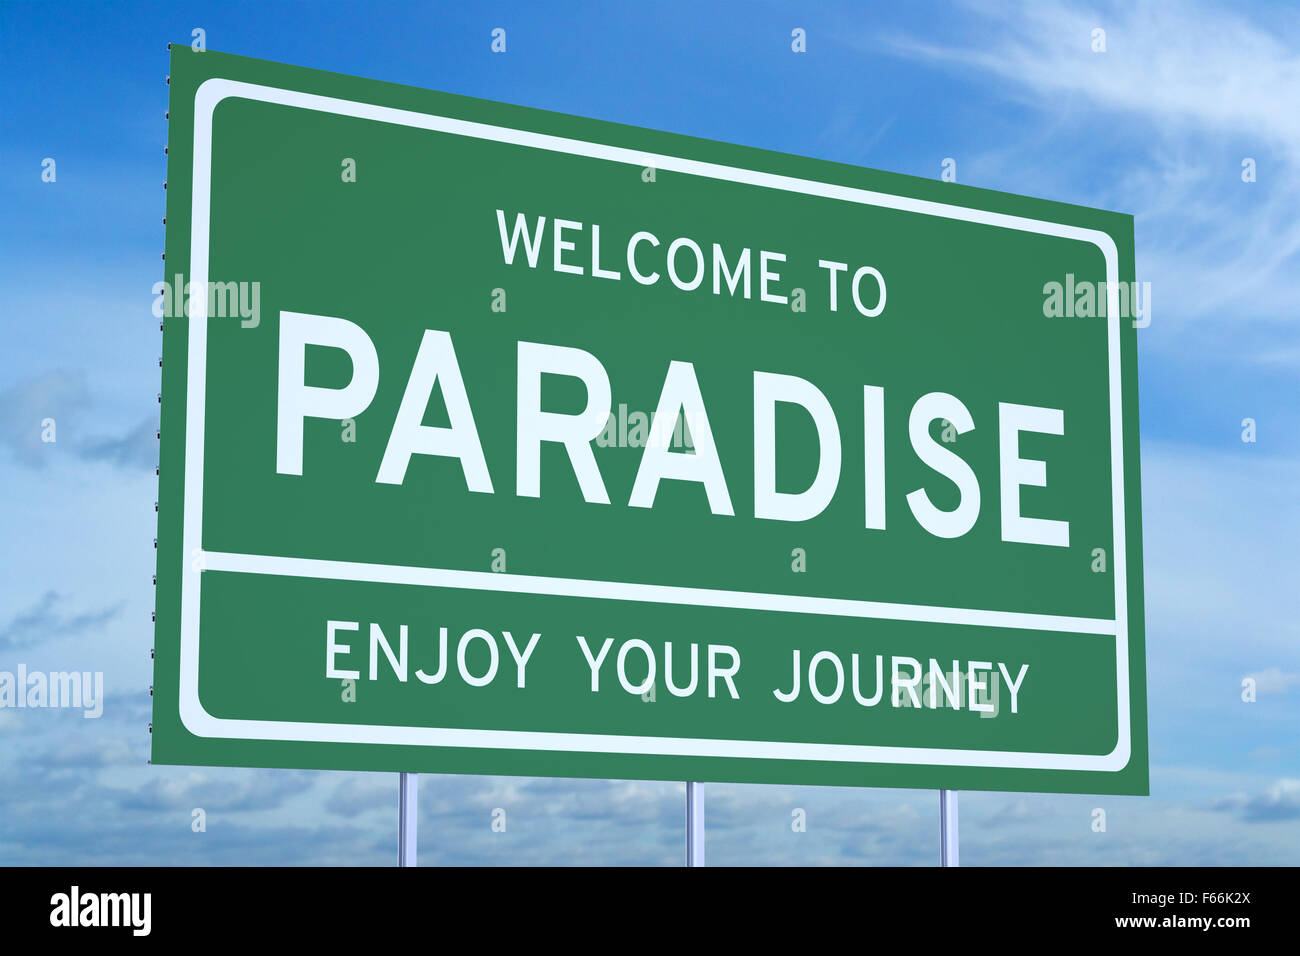 Welcome to Paradise concept on road billboard Stock Photo